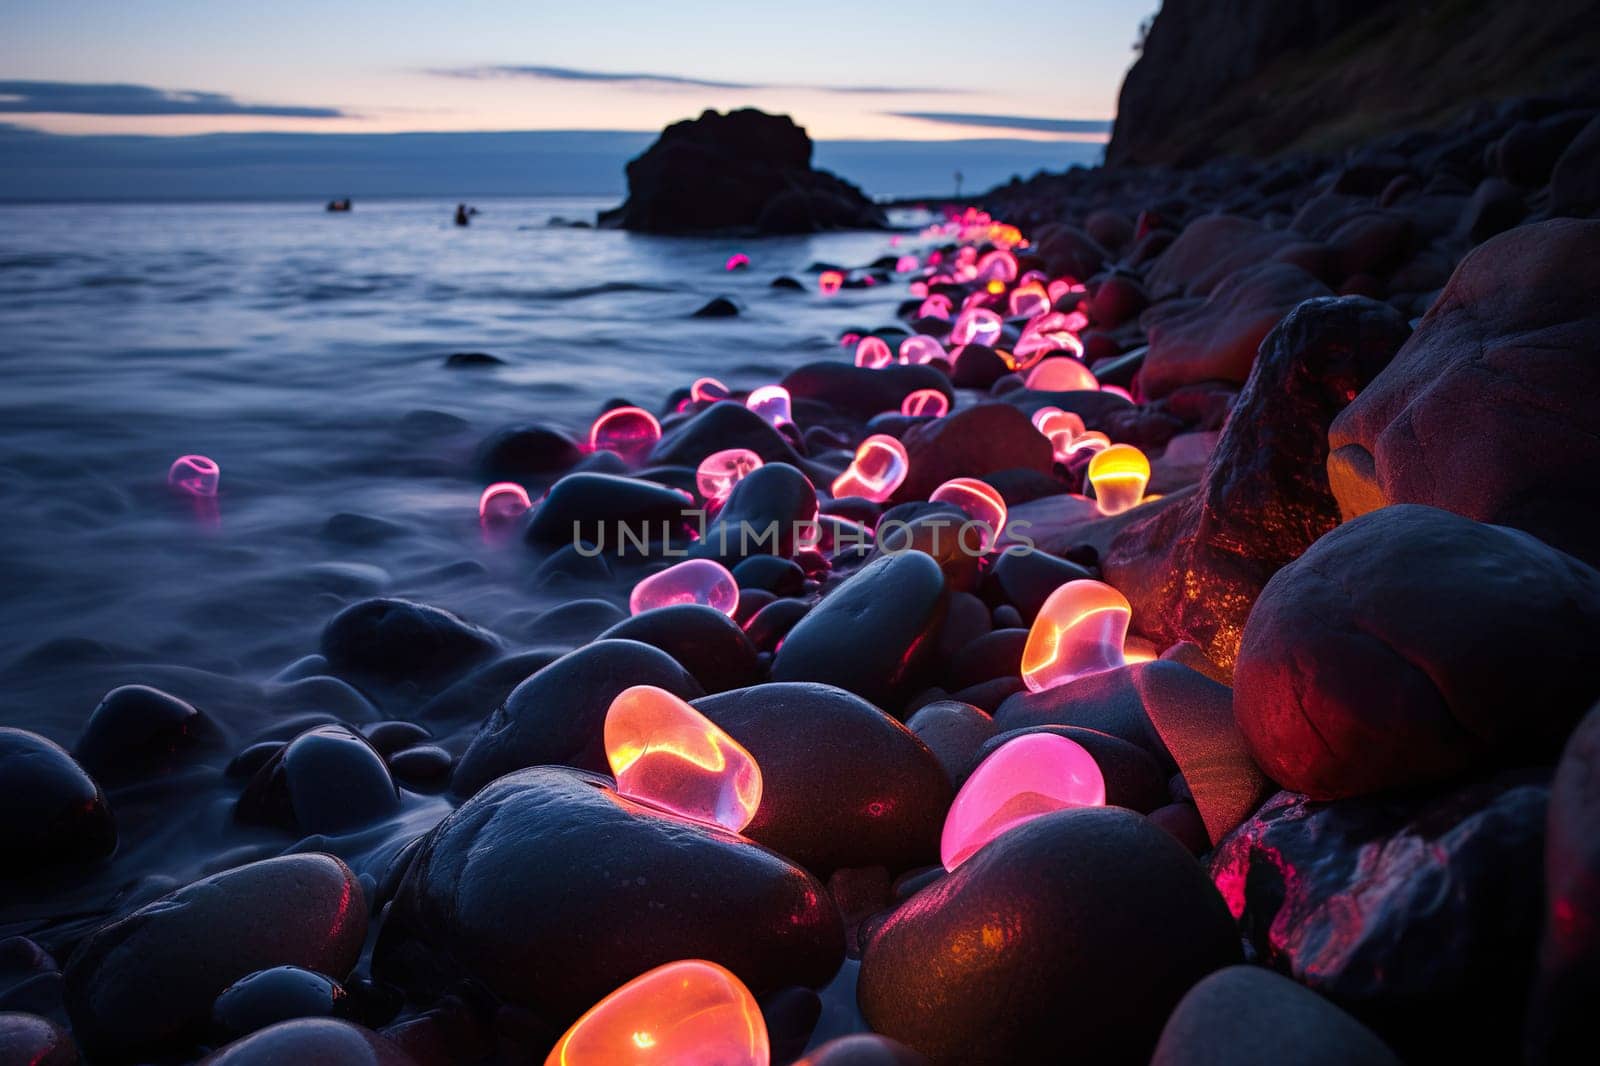 Sea evening landscape with stones, cliffs and neon glow.